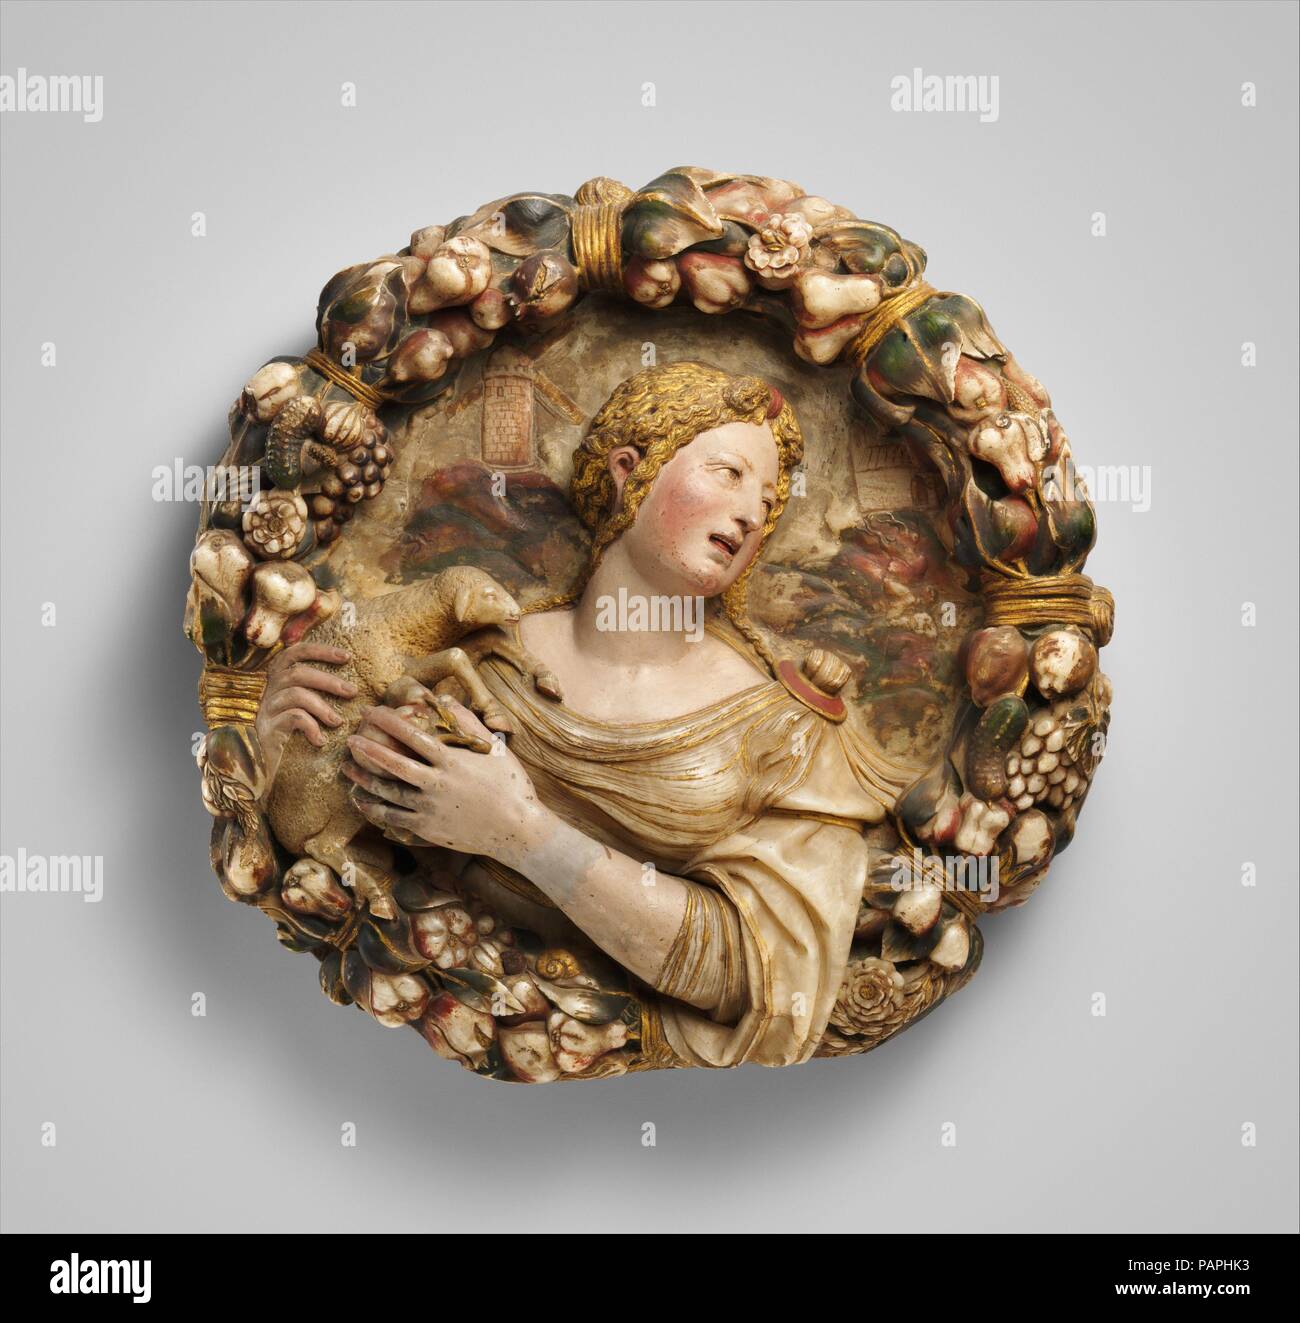 Saint Agnes (one of a pair). Culture: Spanish, possibly Aragon. Dimensions: Overall (confirmed): H. 20 1/4 x W. 20 1/2 x D. 4 7/8 in. (51.4 x 52.1 x 12.4 cm);  Diameter (historic dimensions, superceded): 21 in. (53.3 cm). Maker: Possibly by Diego de Tiedra (Spanish, died 1559). Date: mid-16th century.  These roundels (see also 27.112) from the Conde de Las Almenas collection in Madrid were separated after auction in New York in 1927 but reunited in the Museum a few years later. They may have been part of a larger series, since there is no reason --  biblical or historical --  to show Saint Agn Stock Photo